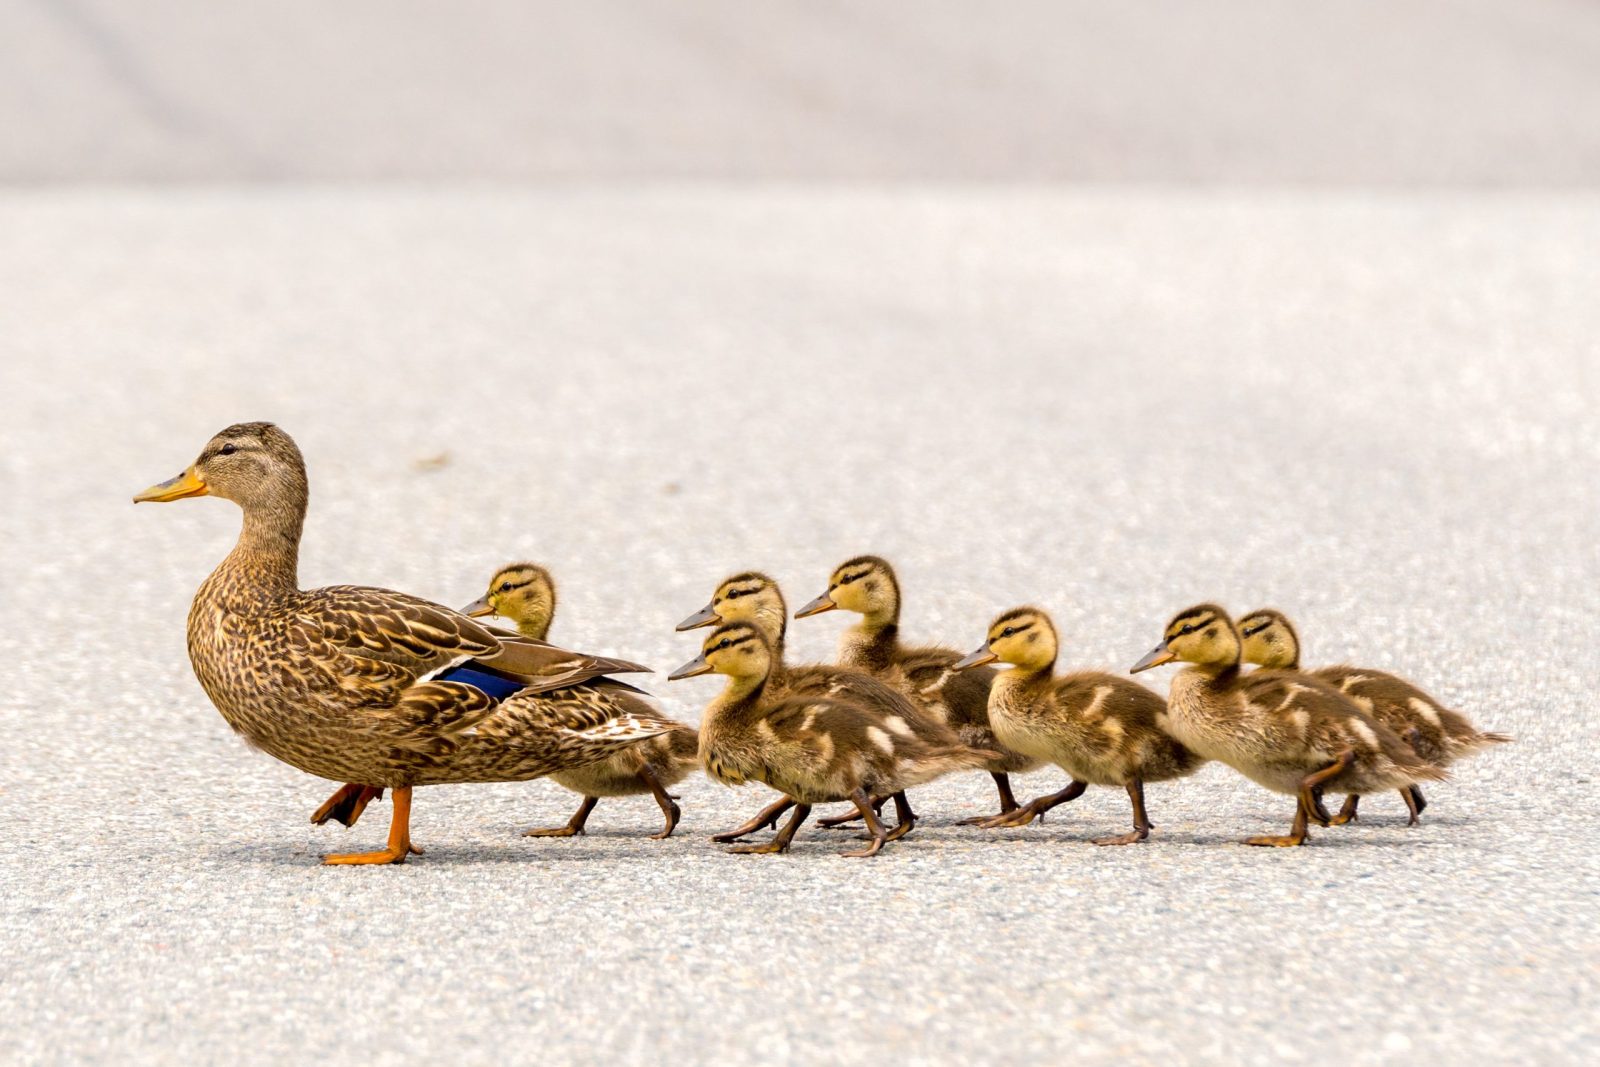 Mom and ducklings crossing the road